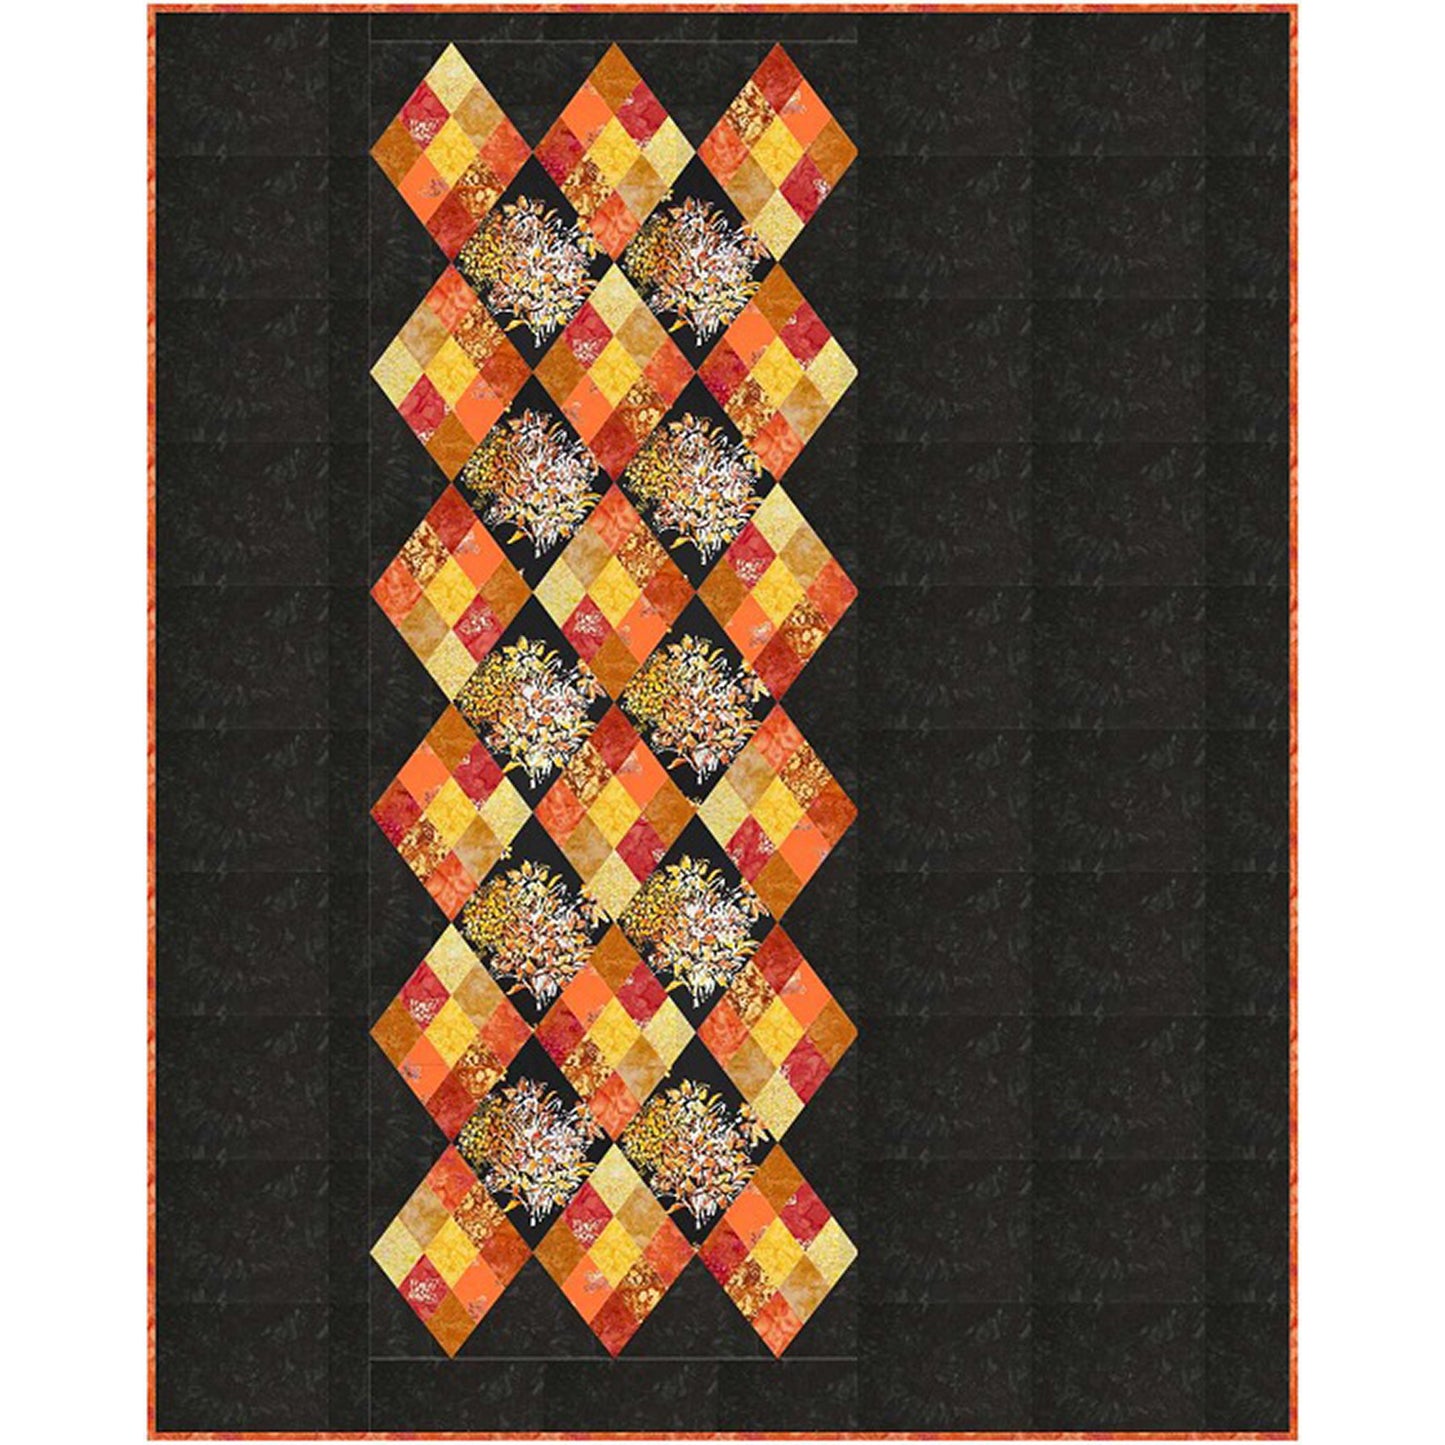 Vibrant quilt featuring a mix of orange, yellow, and black squares, ideal for adding a pop of color to any room.